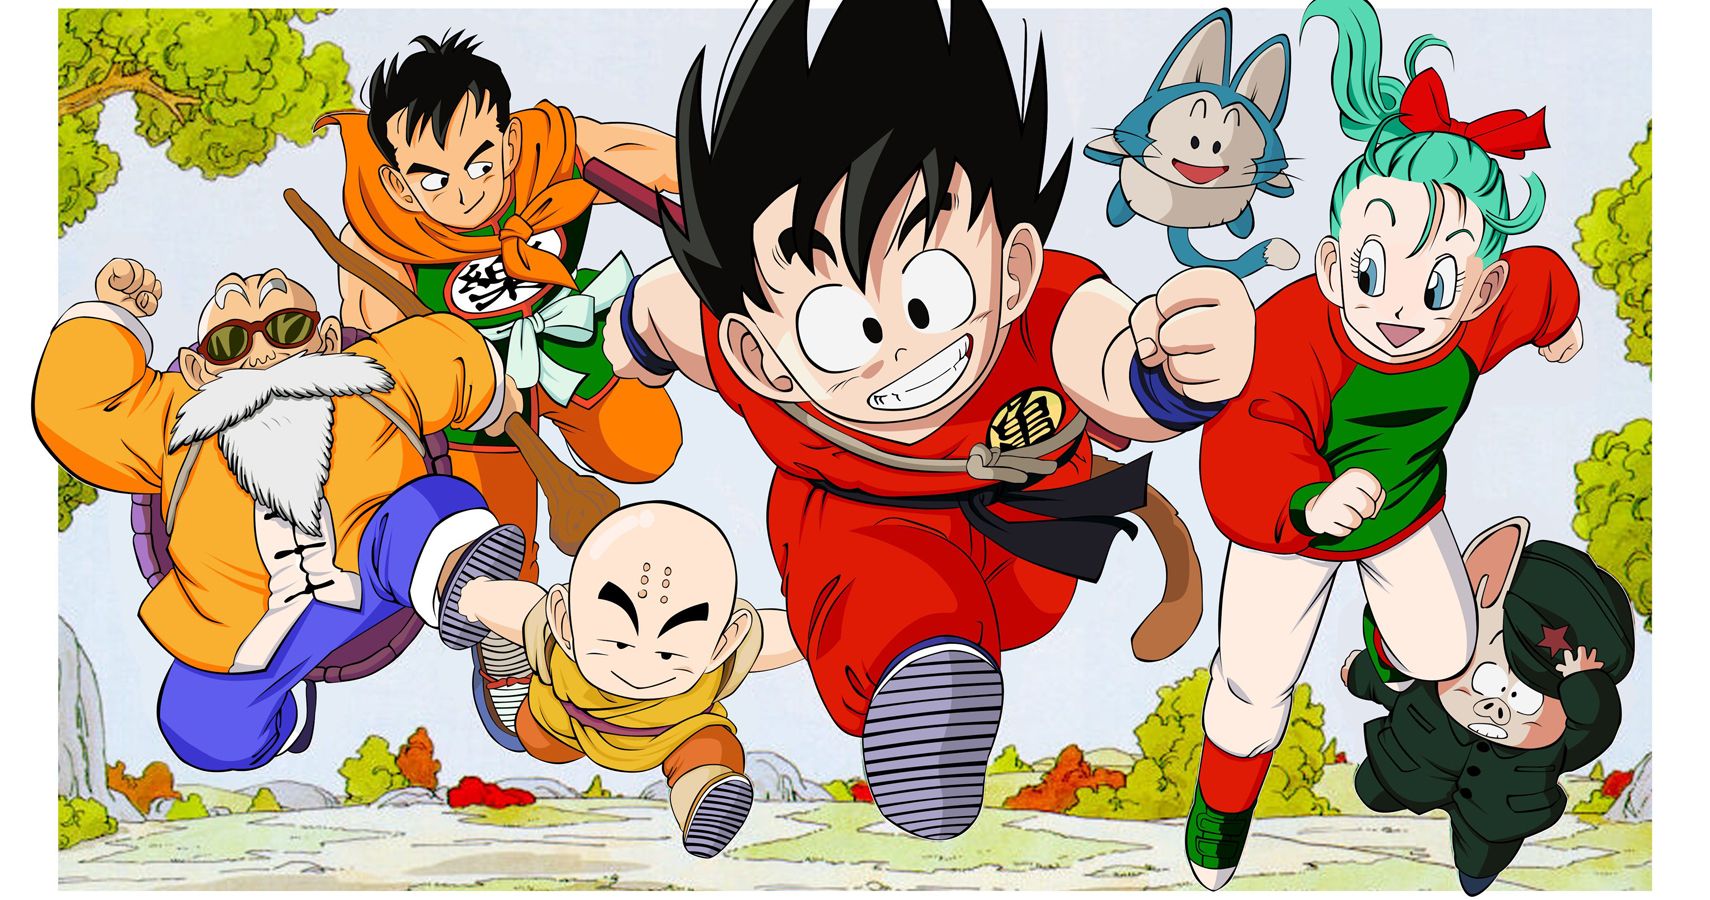 Confronting the Possibility of a Disney Live-Action Dragon Ball Movie